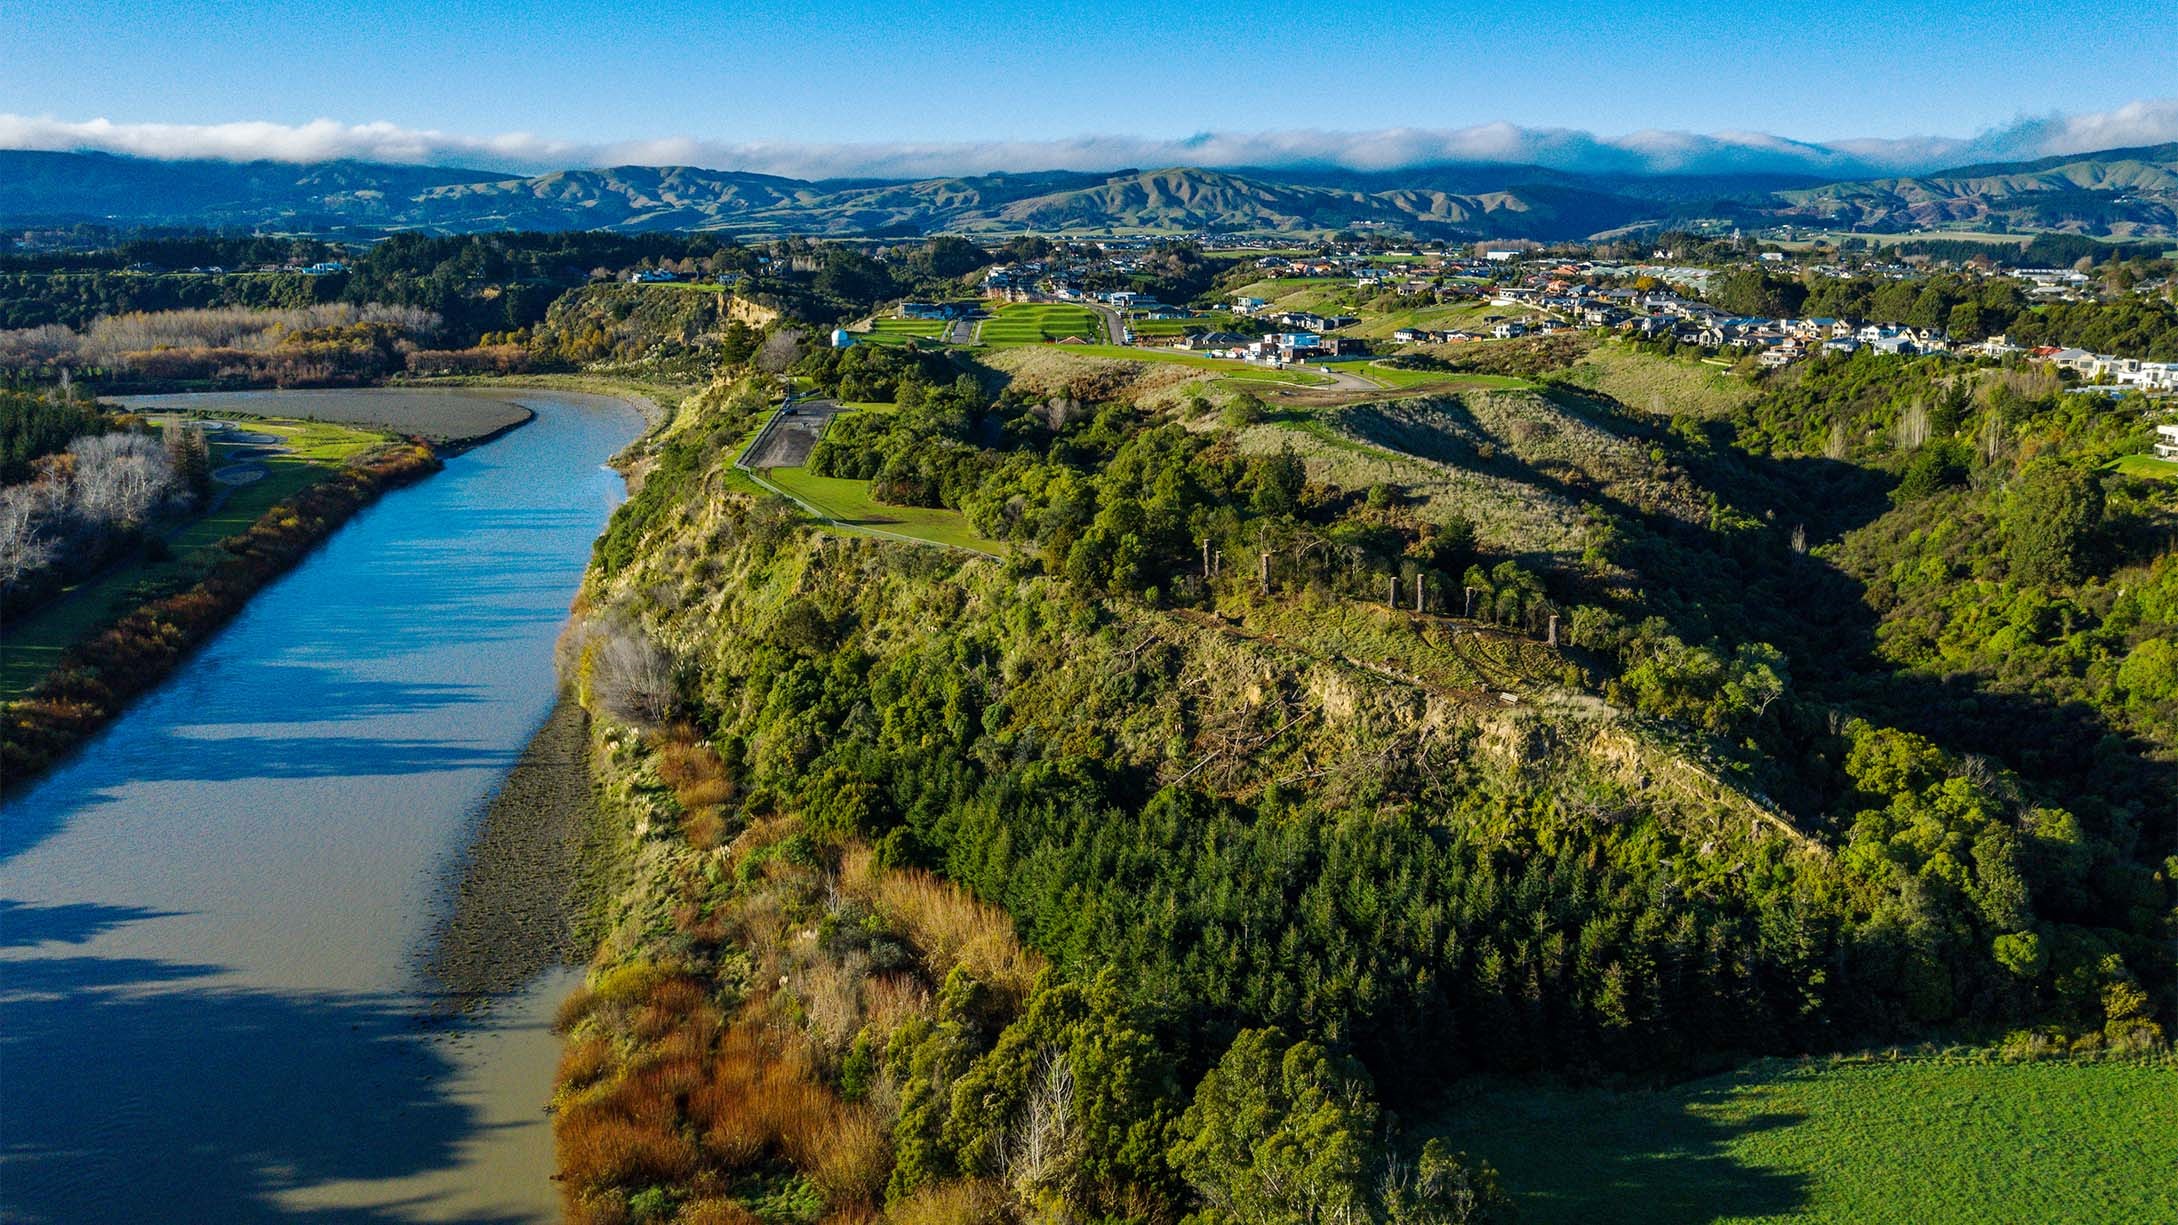 Aerial view of a heavily forested clifftop park overlooking the river.